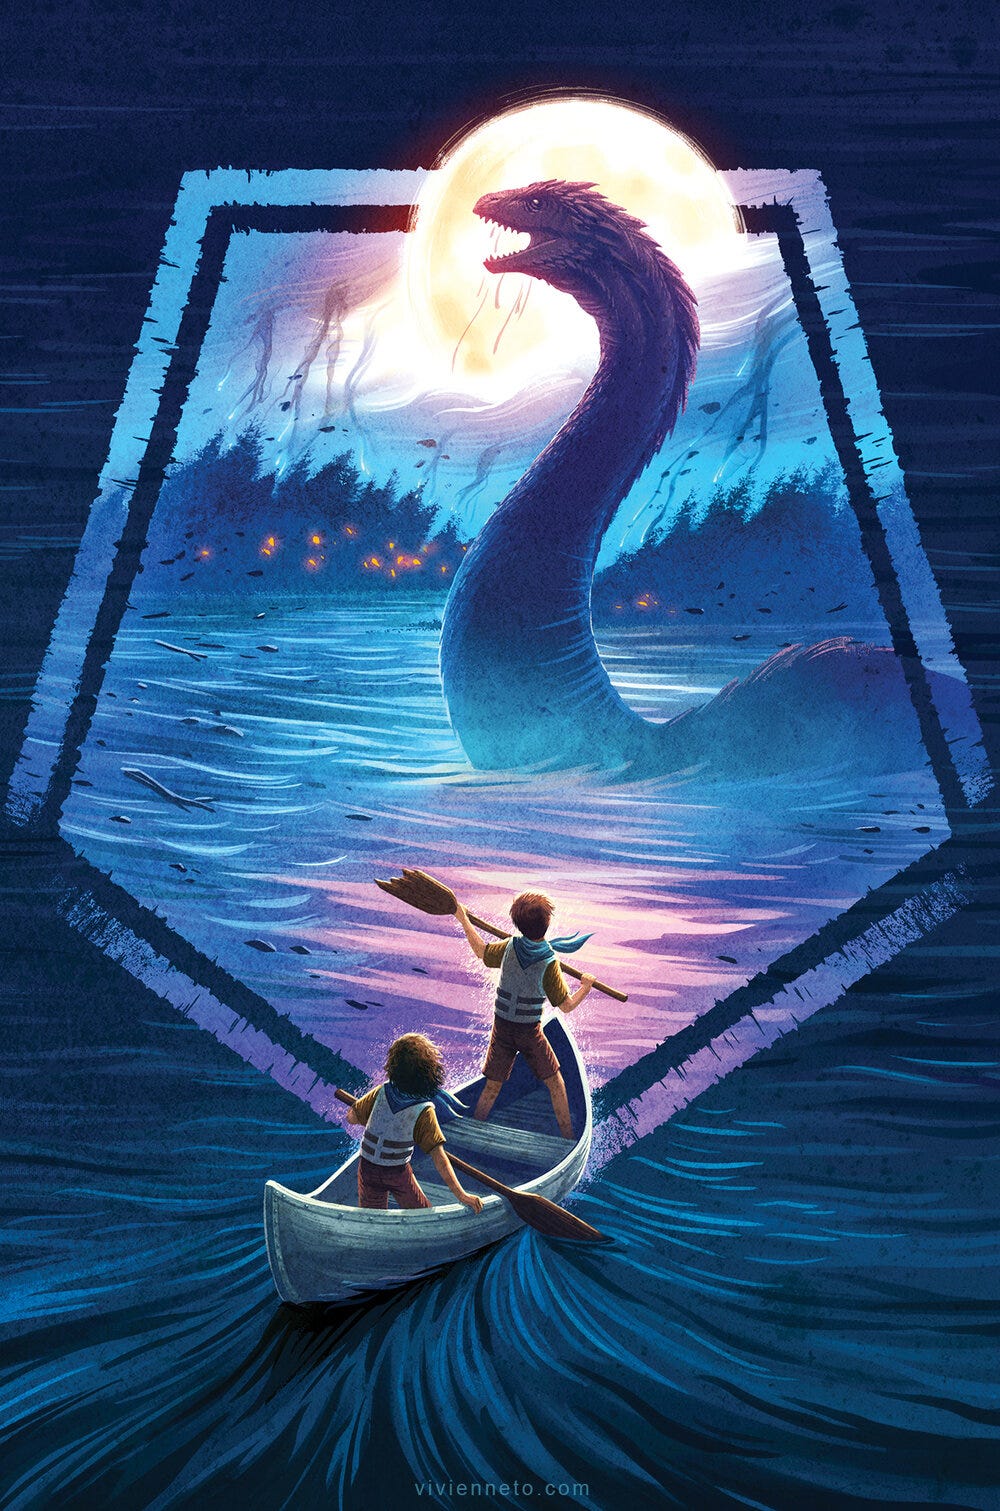 Book cover for Arlo Finch in the Lake of the Moon. A large monster lifts its head out of the water on a long neck. A full moon shines on a dense woods spotted with campfires. In the foreground, two children in scout uniforms paddle a canoe toward the creature.